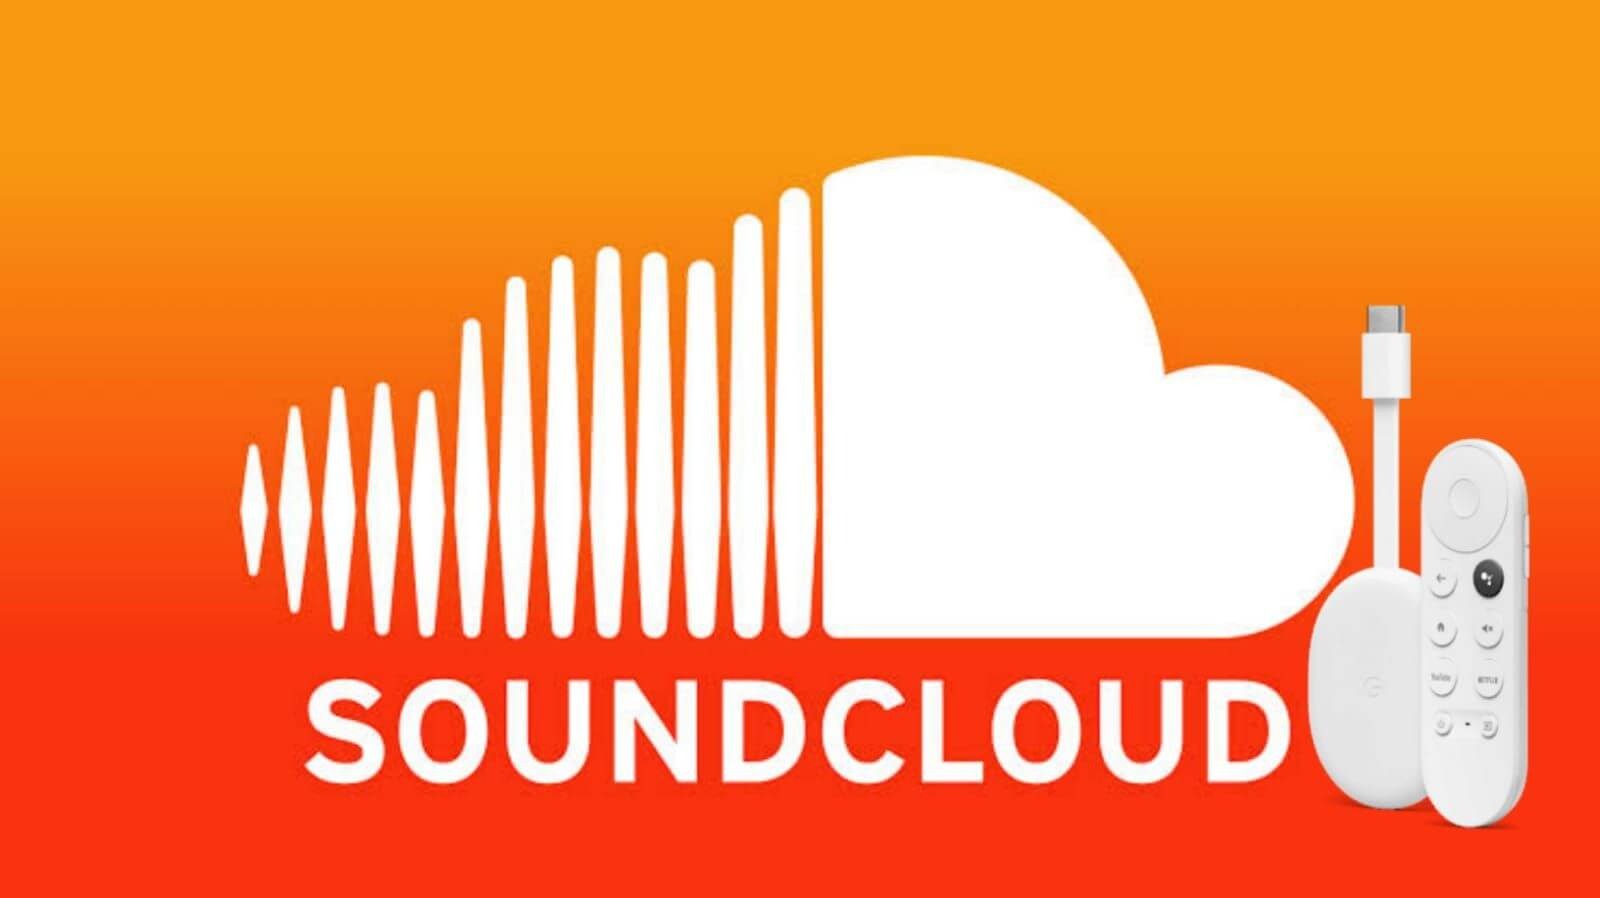 How To Play SoundCloud On Google Home